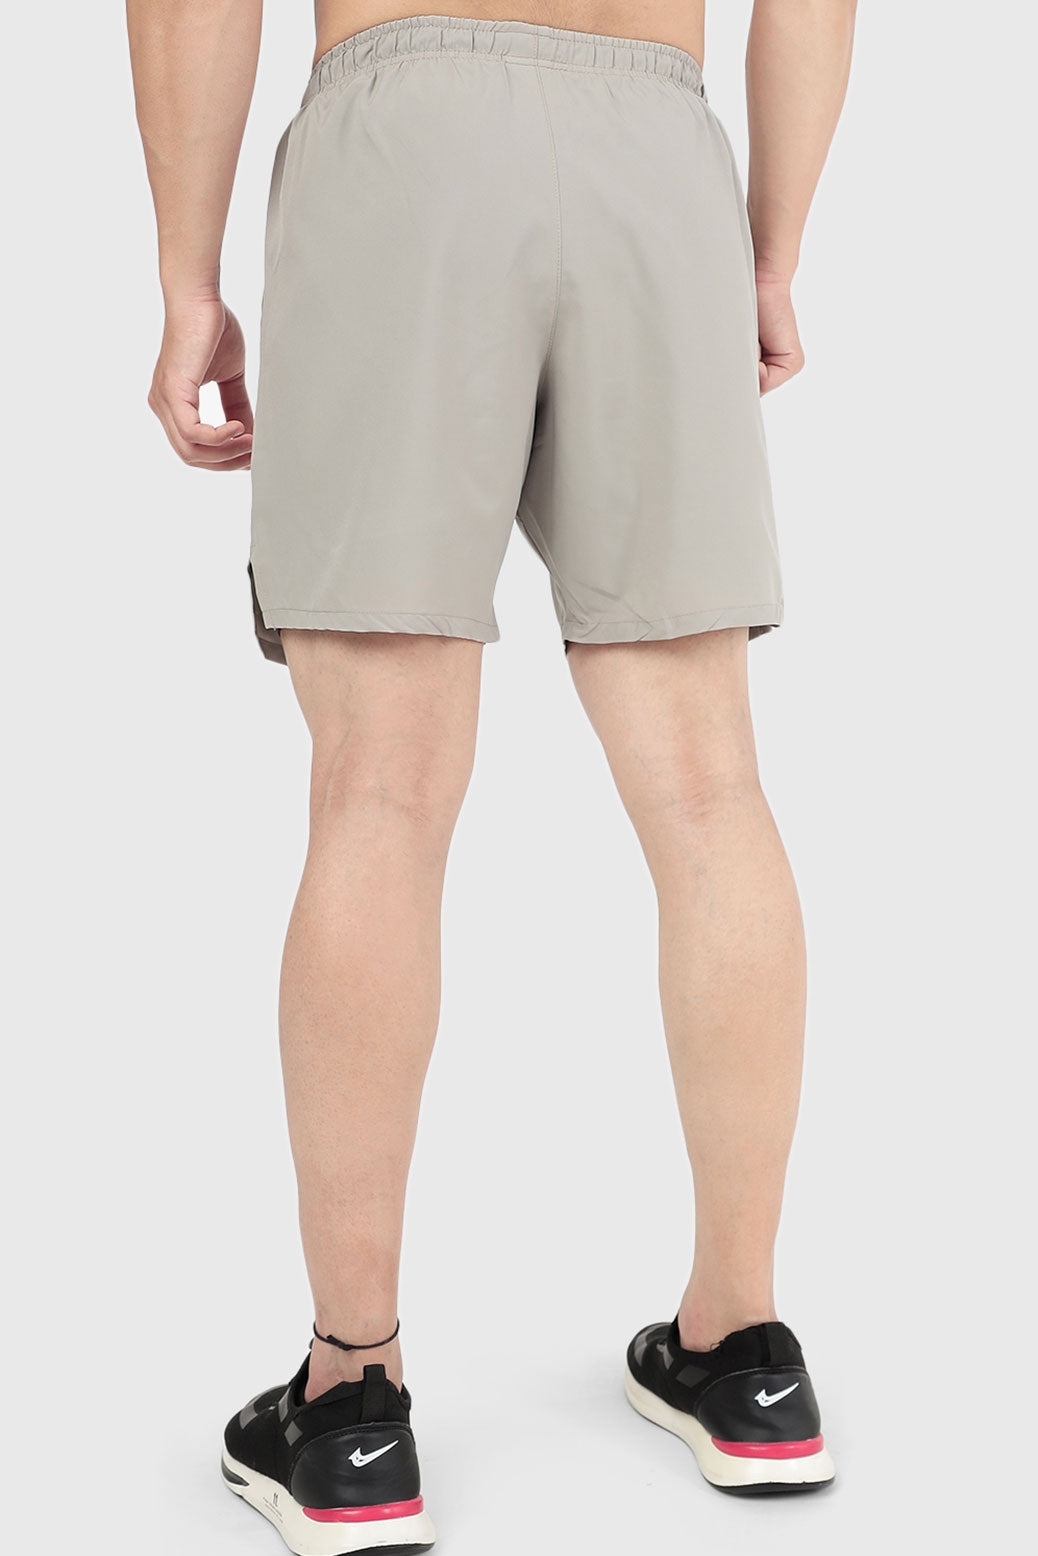 2 in 1 Compression Shorts Beige